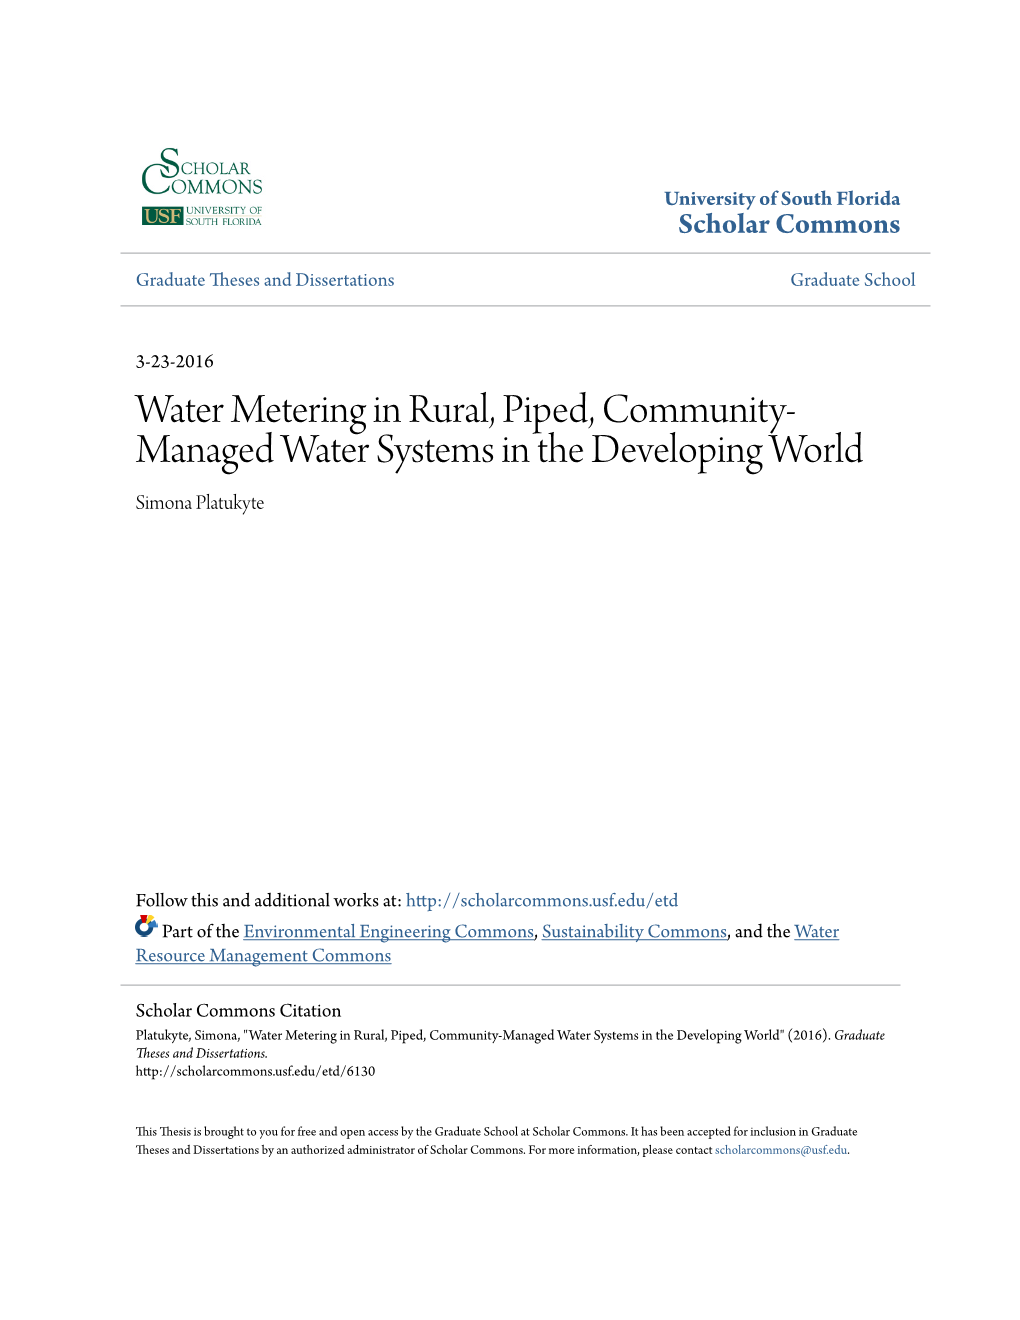 Water Metering in Rural, Piped, Community-Managed Water Systems in the Developing World" (2016)